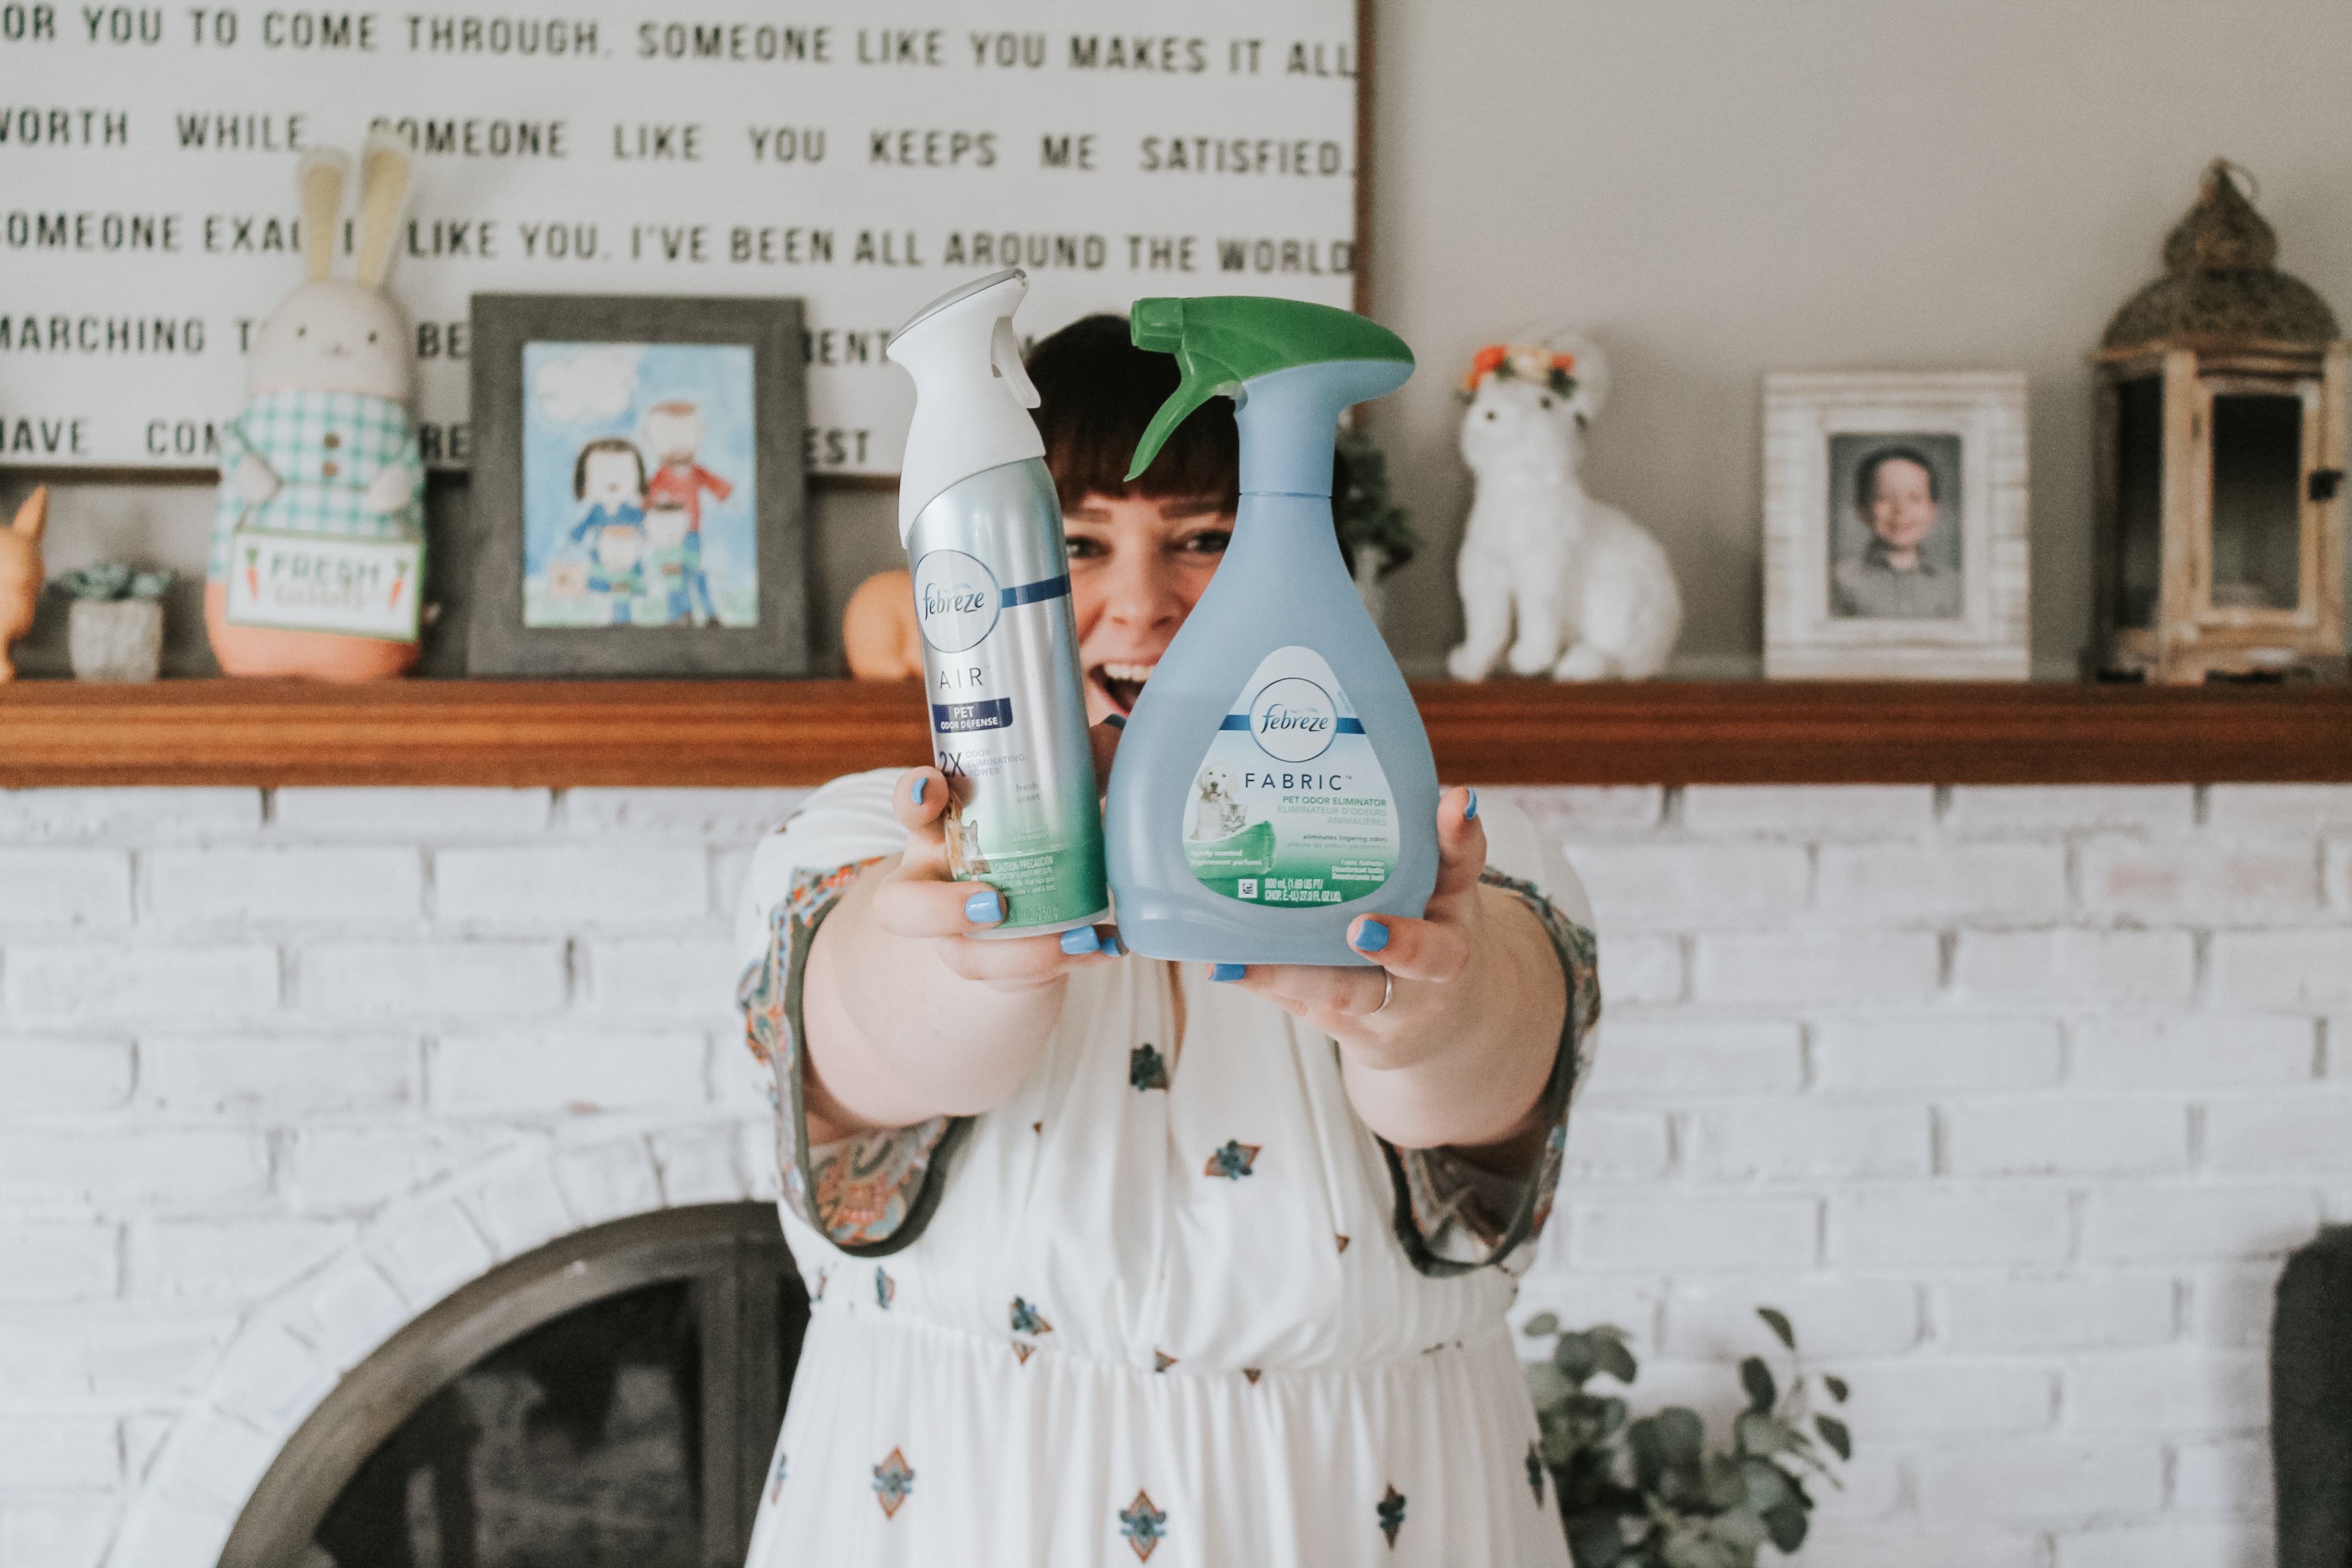 How We Keep Our Home with Six Rescue Pets Smelling Fresh